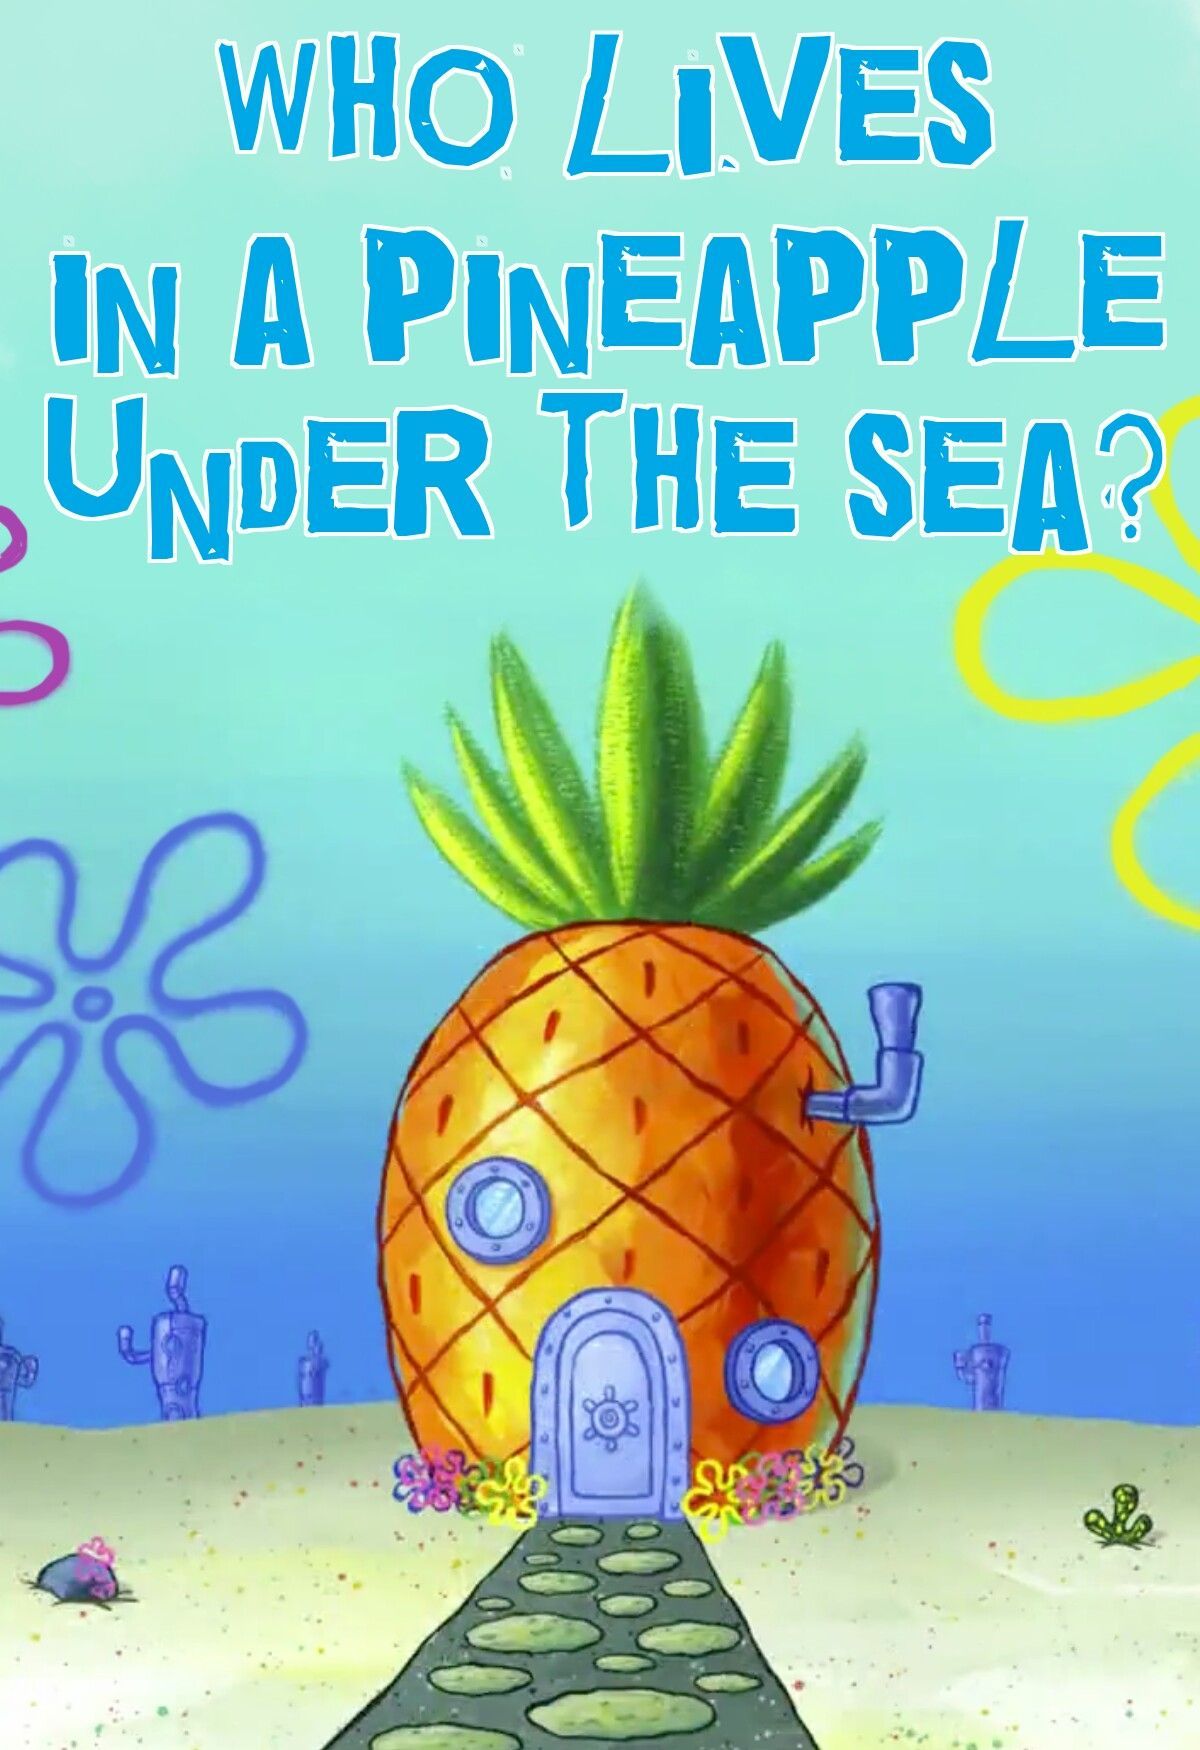 SpongeBob wallpaper- Who lives in a pineapple under the sea